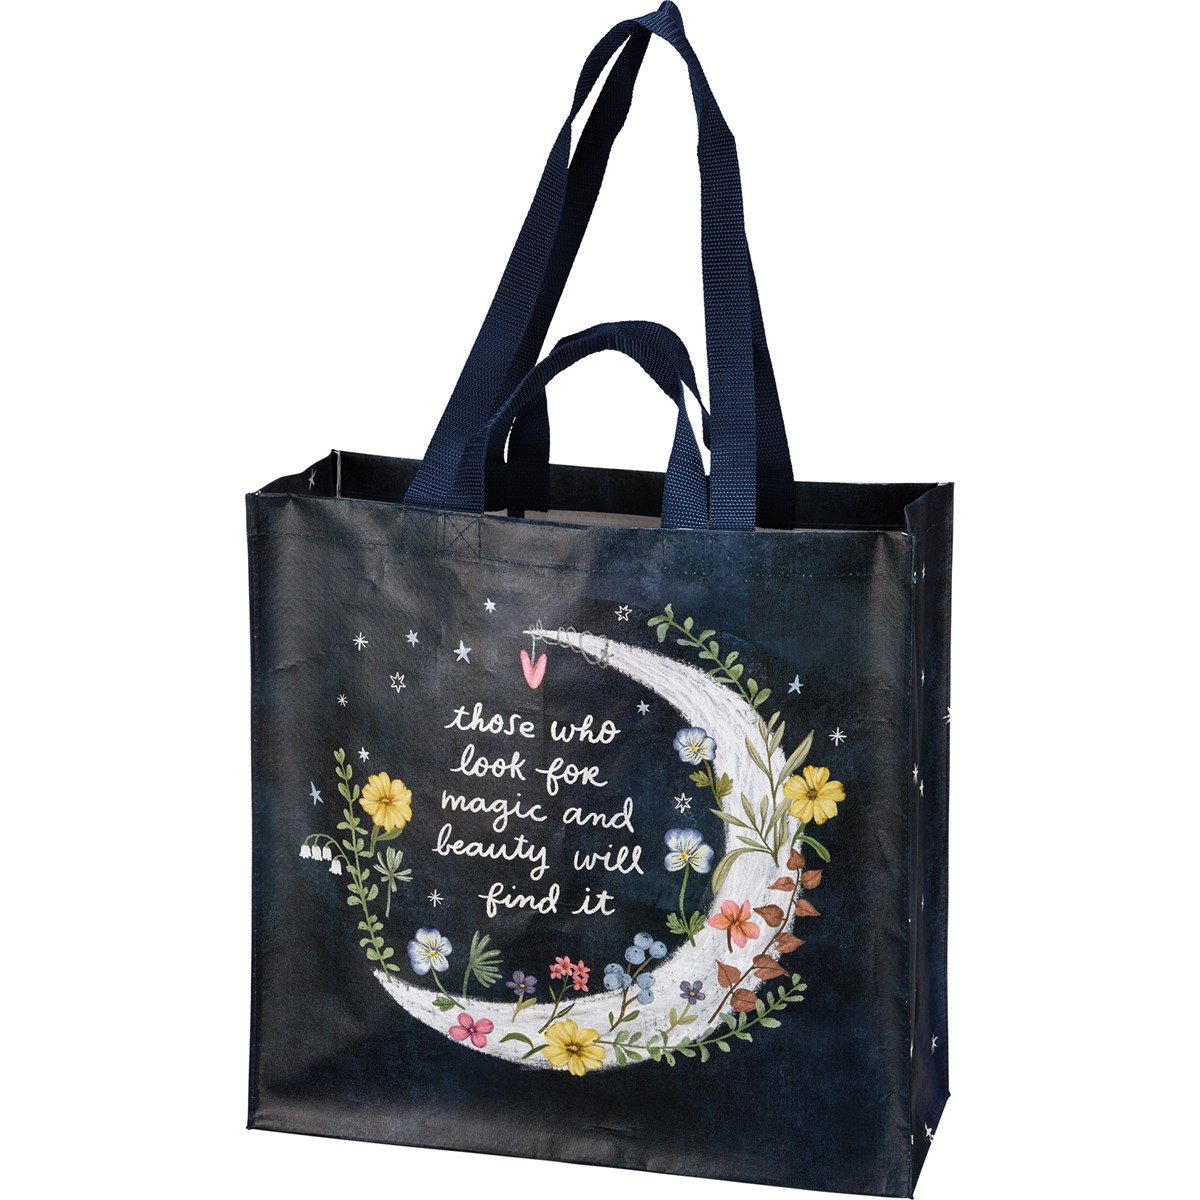 Look For Magic And Beauty Market Tote - Post-Consumer Material, Nylon